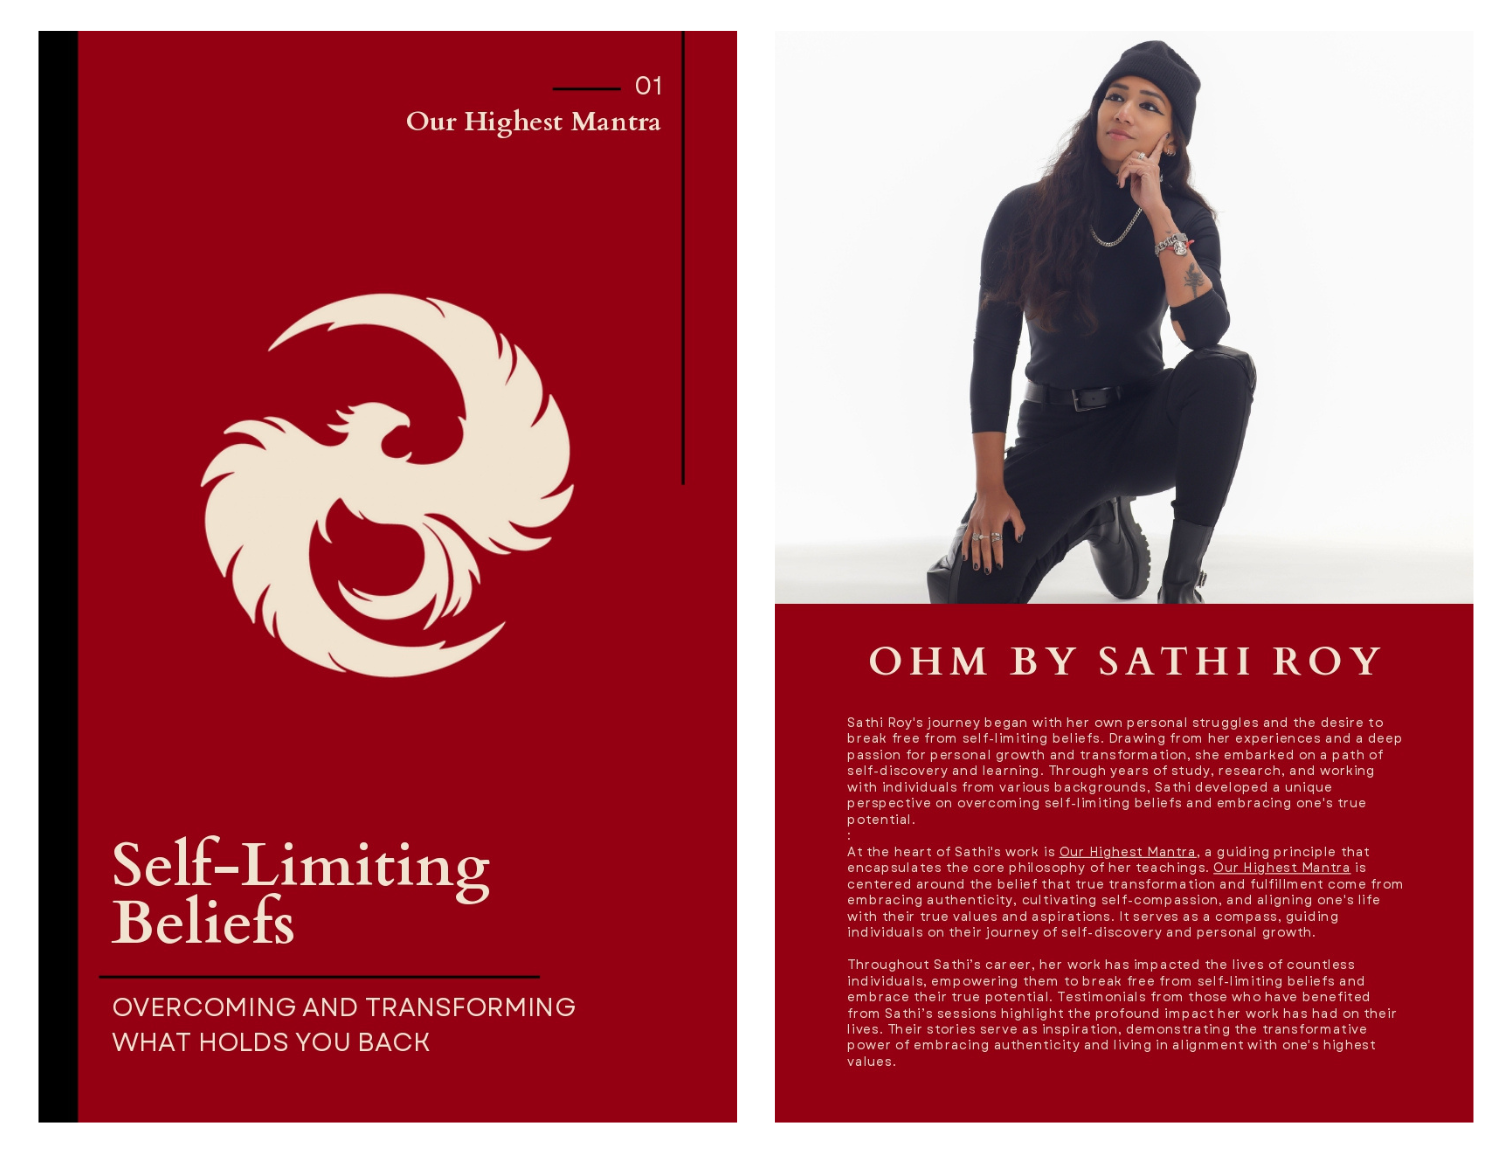 E-book | Our Highest Mantra: Overcoming And Transforming What Holds You Back (Included in Membership)